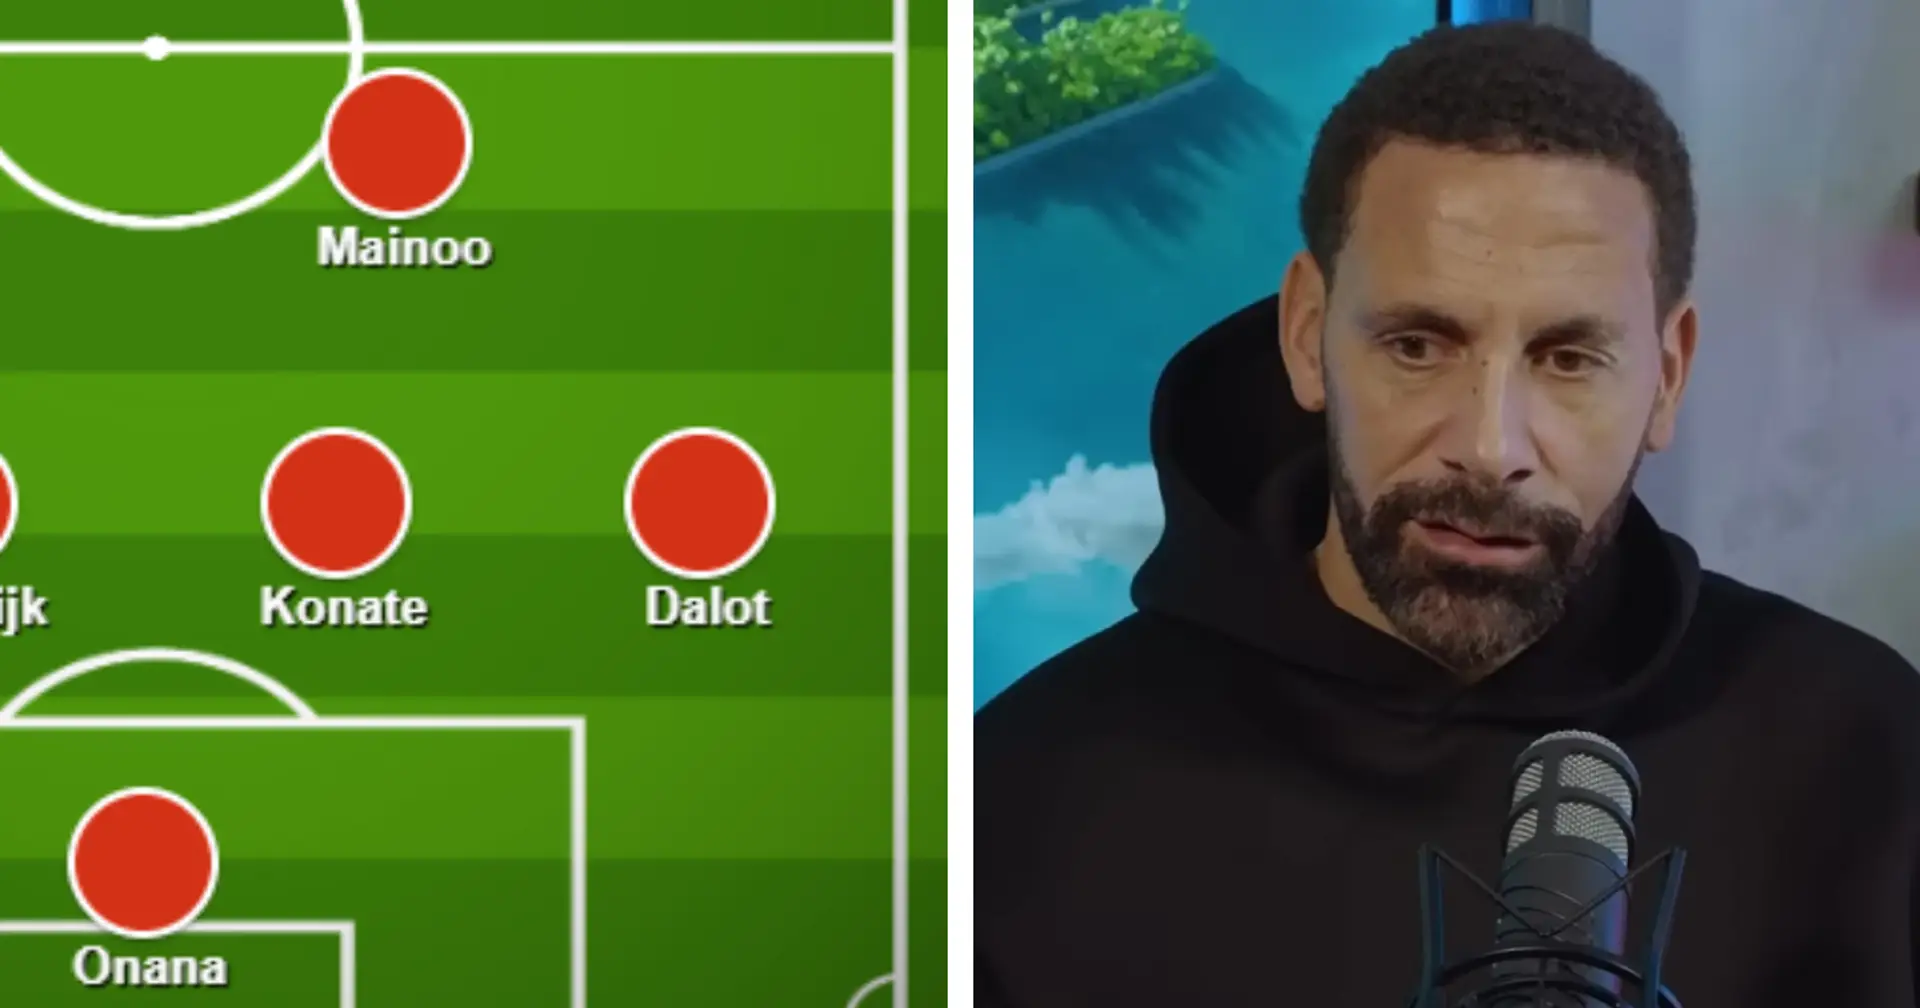 Rio Ferdinand includes 5 Man United players in combined XI with Liverpool, leaves Darwin out